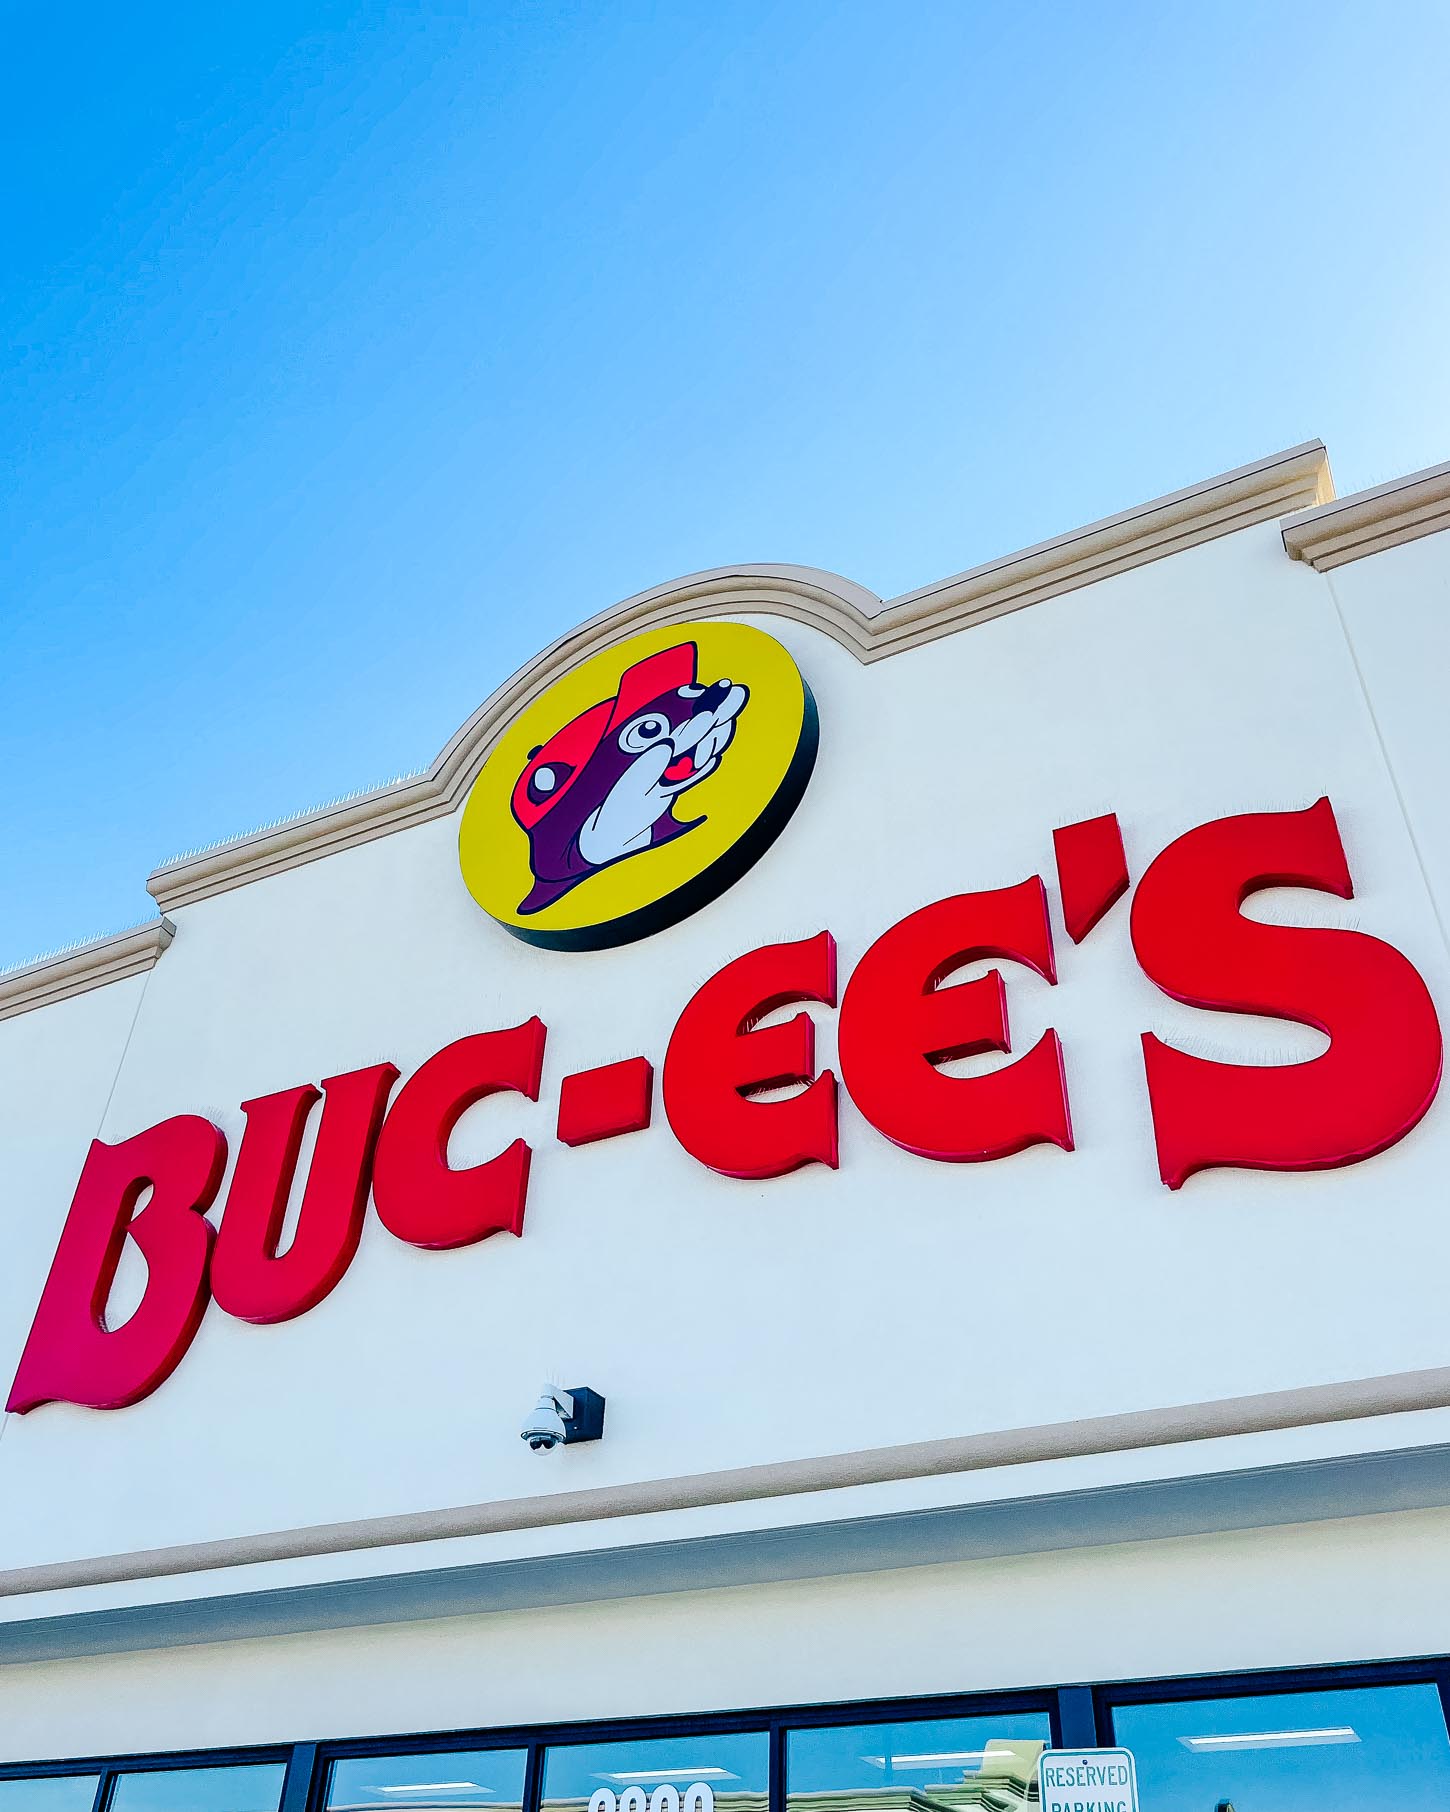 buc-ees review | www.iamafoodblog.com